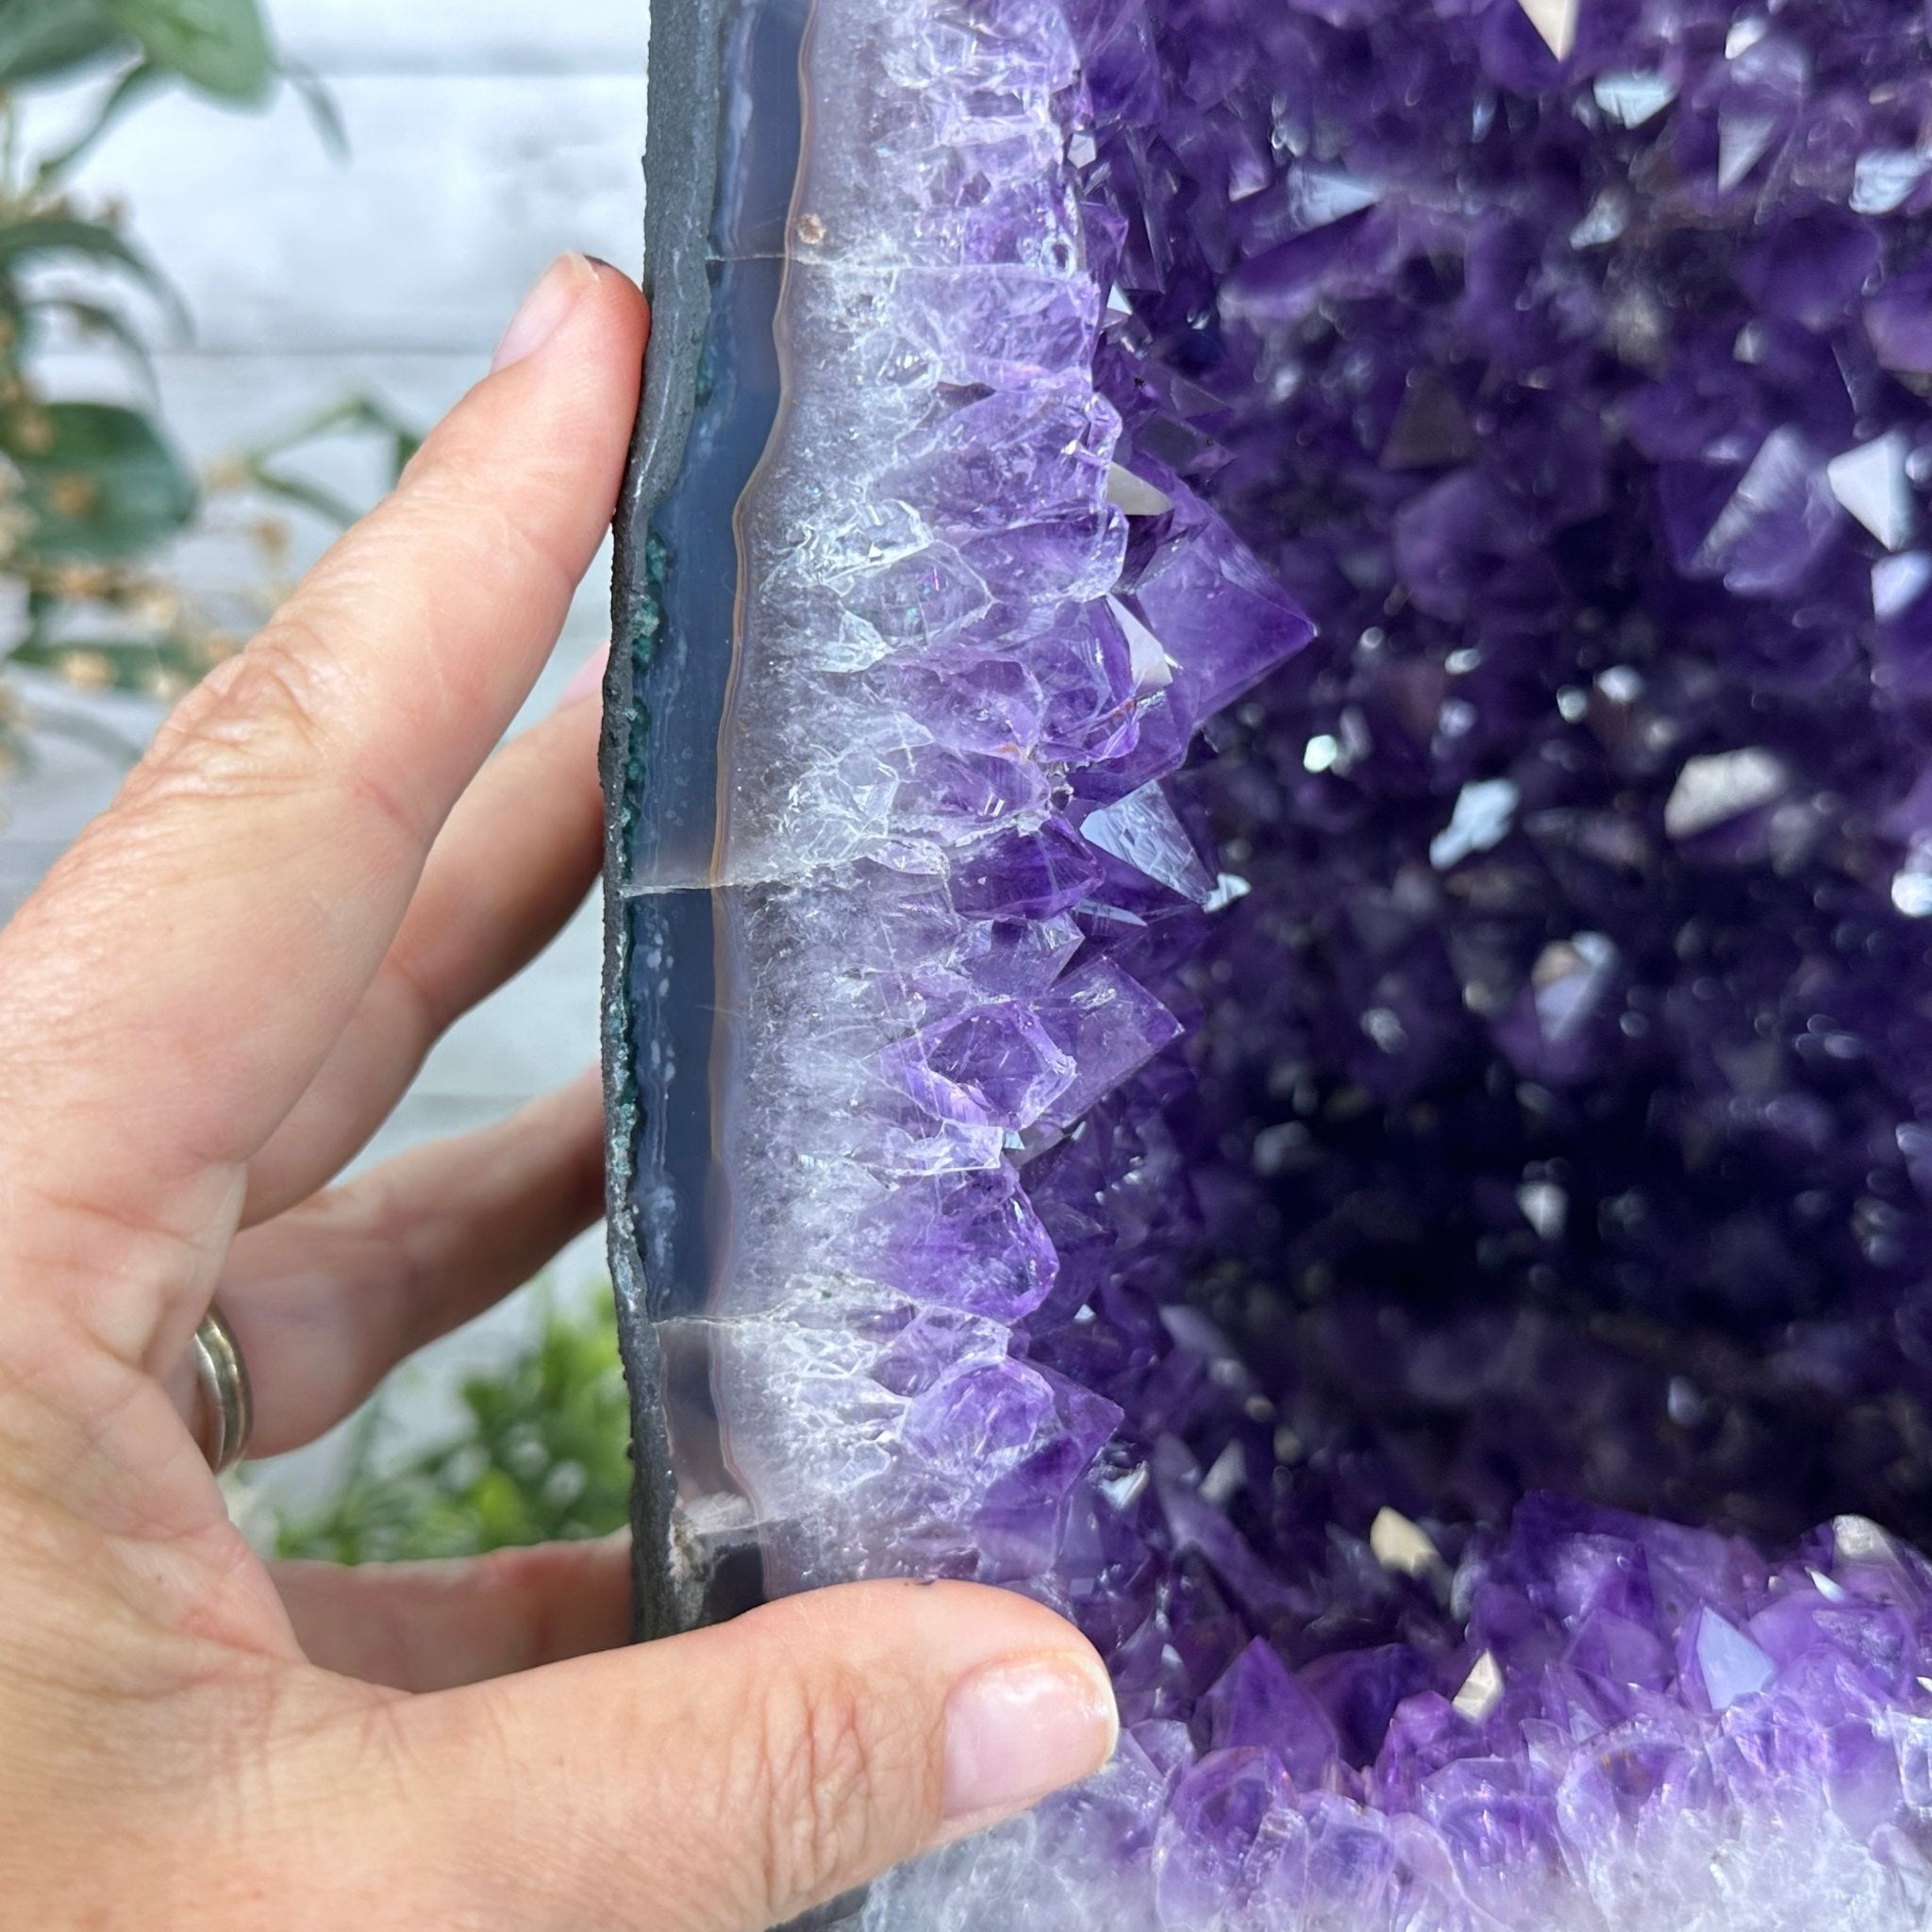 Extra Plus Quality Brazilian Amethyst Cathedral, 72.8 lbs & 21.25" Tall, Model #5601-0883 by Brazil Gems - Brazil GemsBrazil GemsExtra Plus Quality Brazilian Amethyst Cathedral, 72.8 lbs & 21.25" Tall, Model #5601-0883 by Brazil GemsCathedrals5601-0883